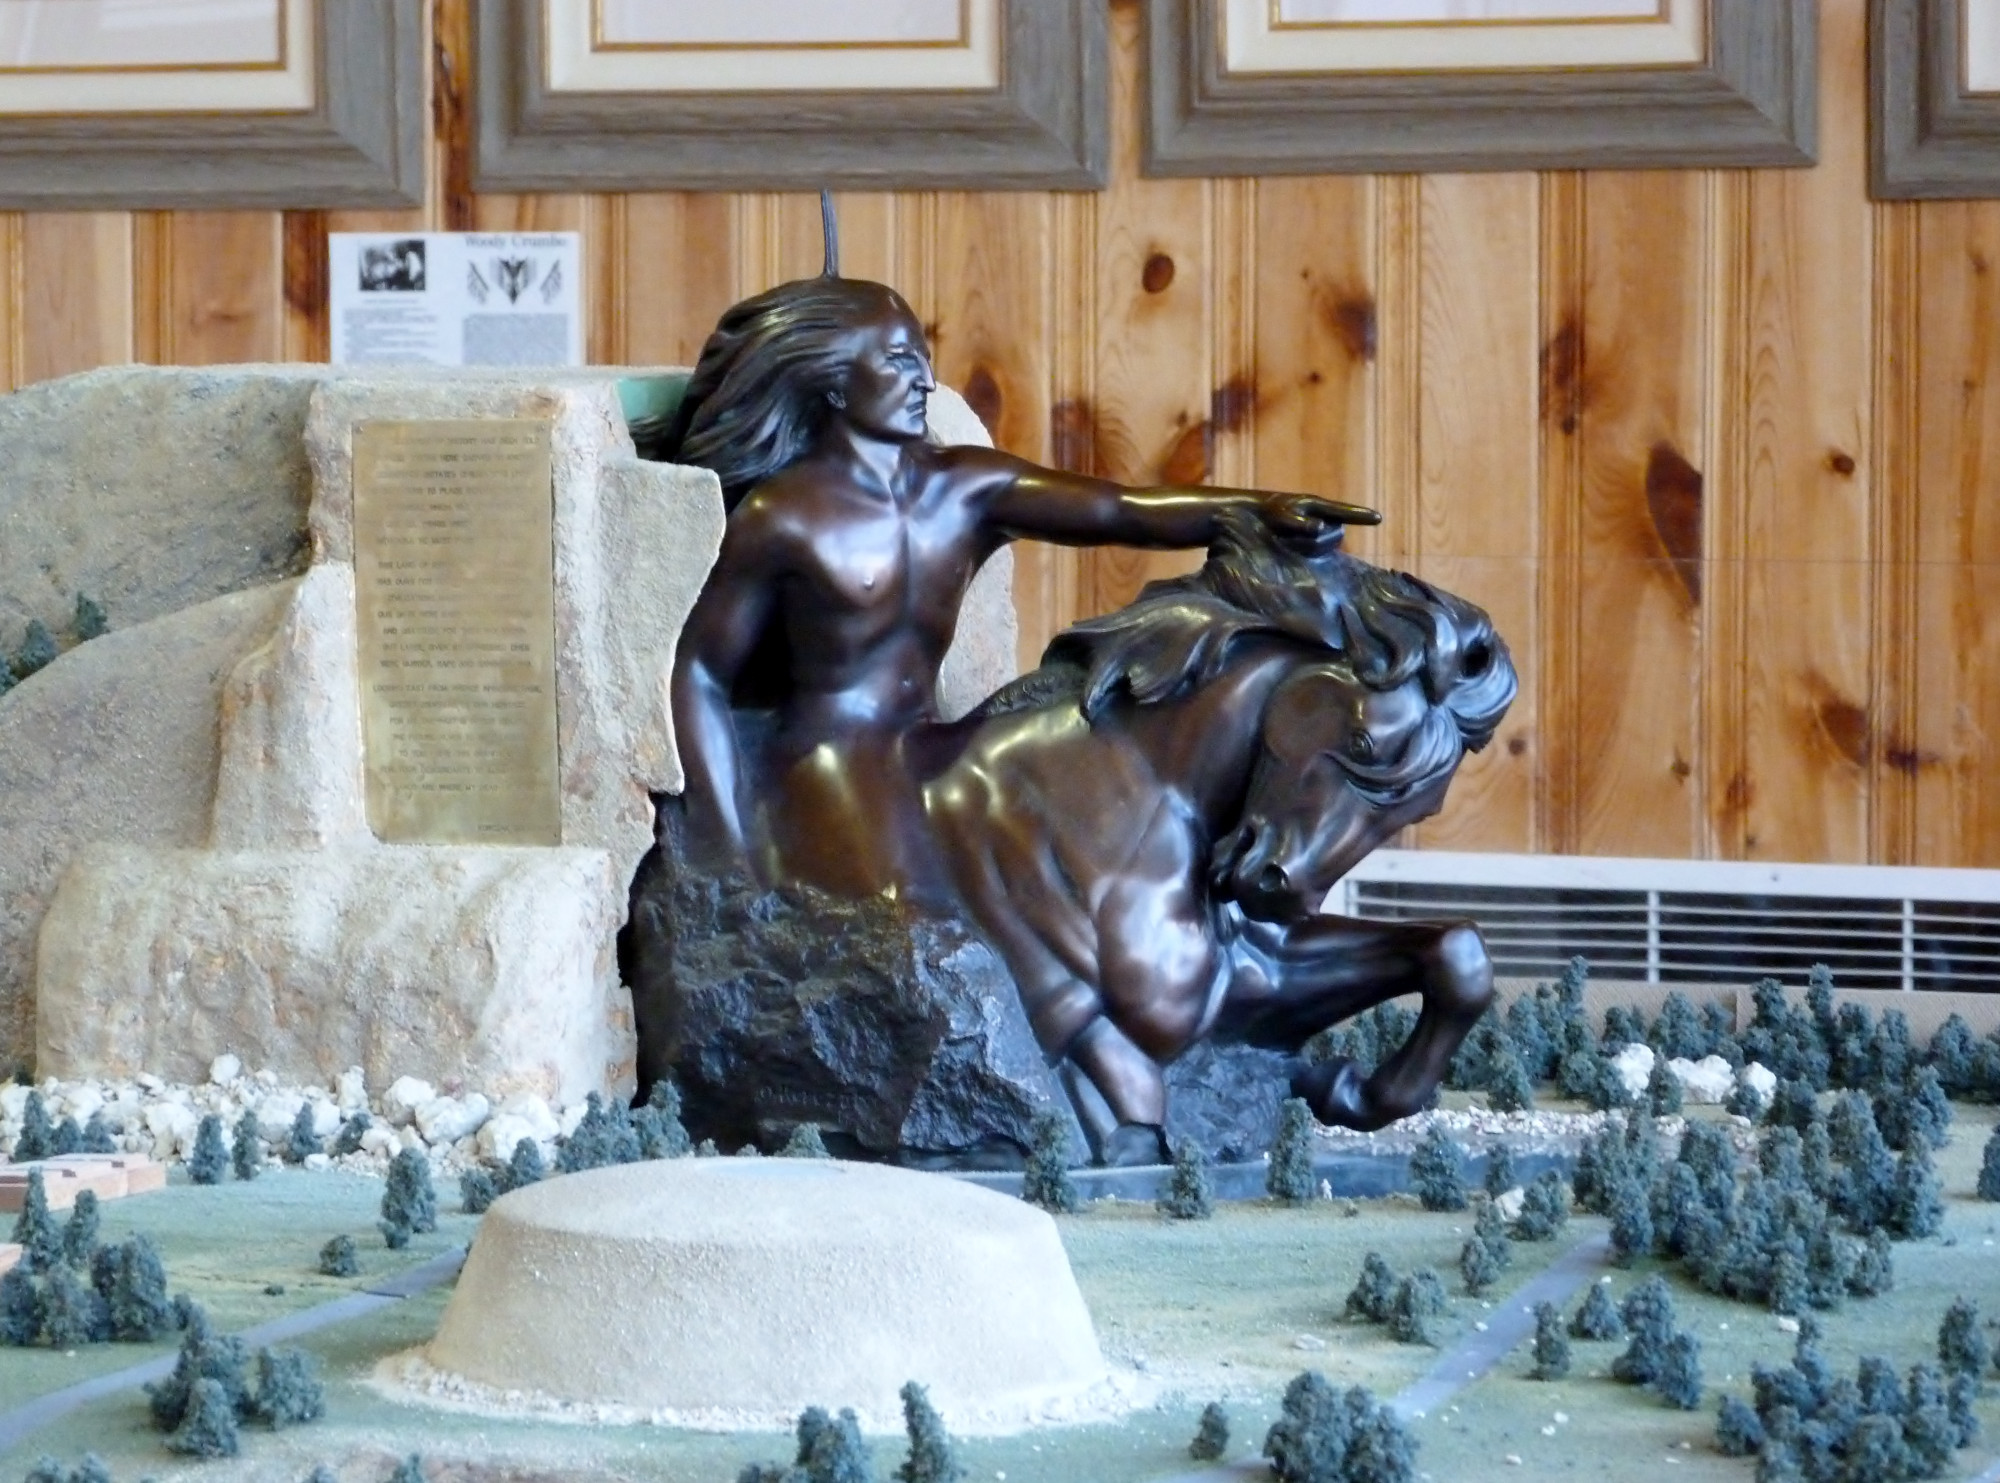 Diorama Of The Propsed Site